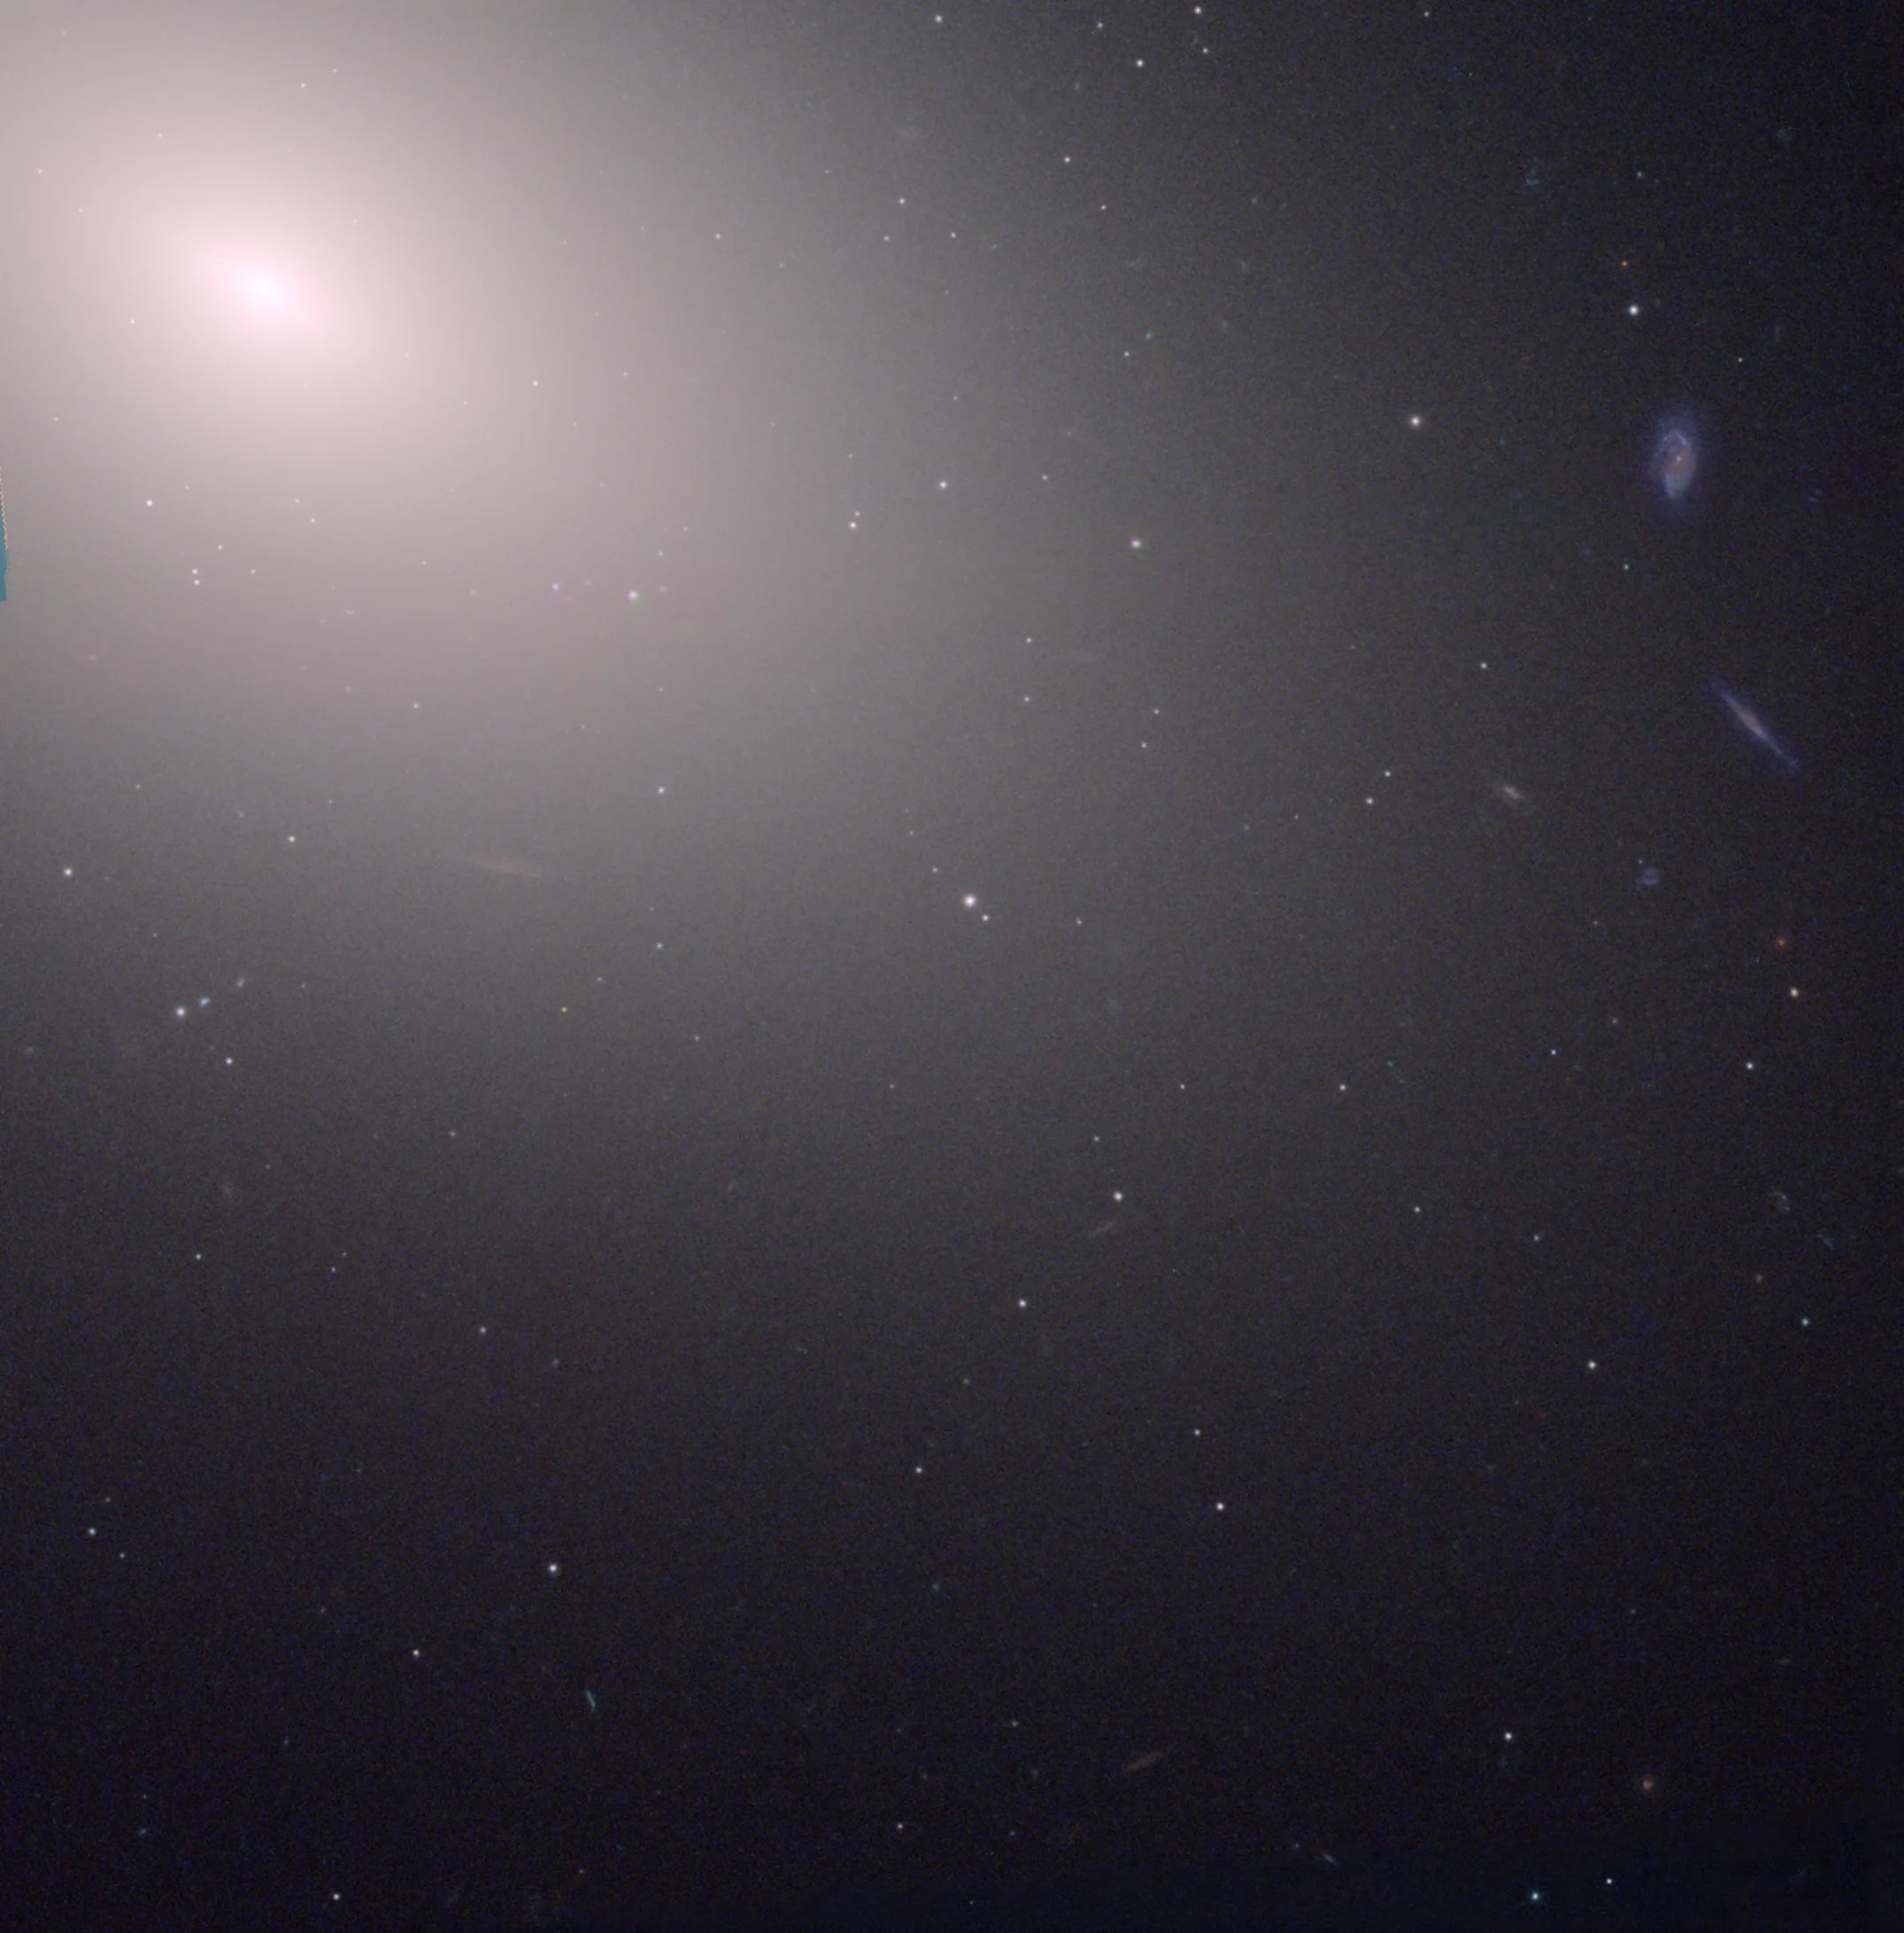 A hazy white-yellow light shines in the top left corner of the image against black space, dotted with faint, distant stars.